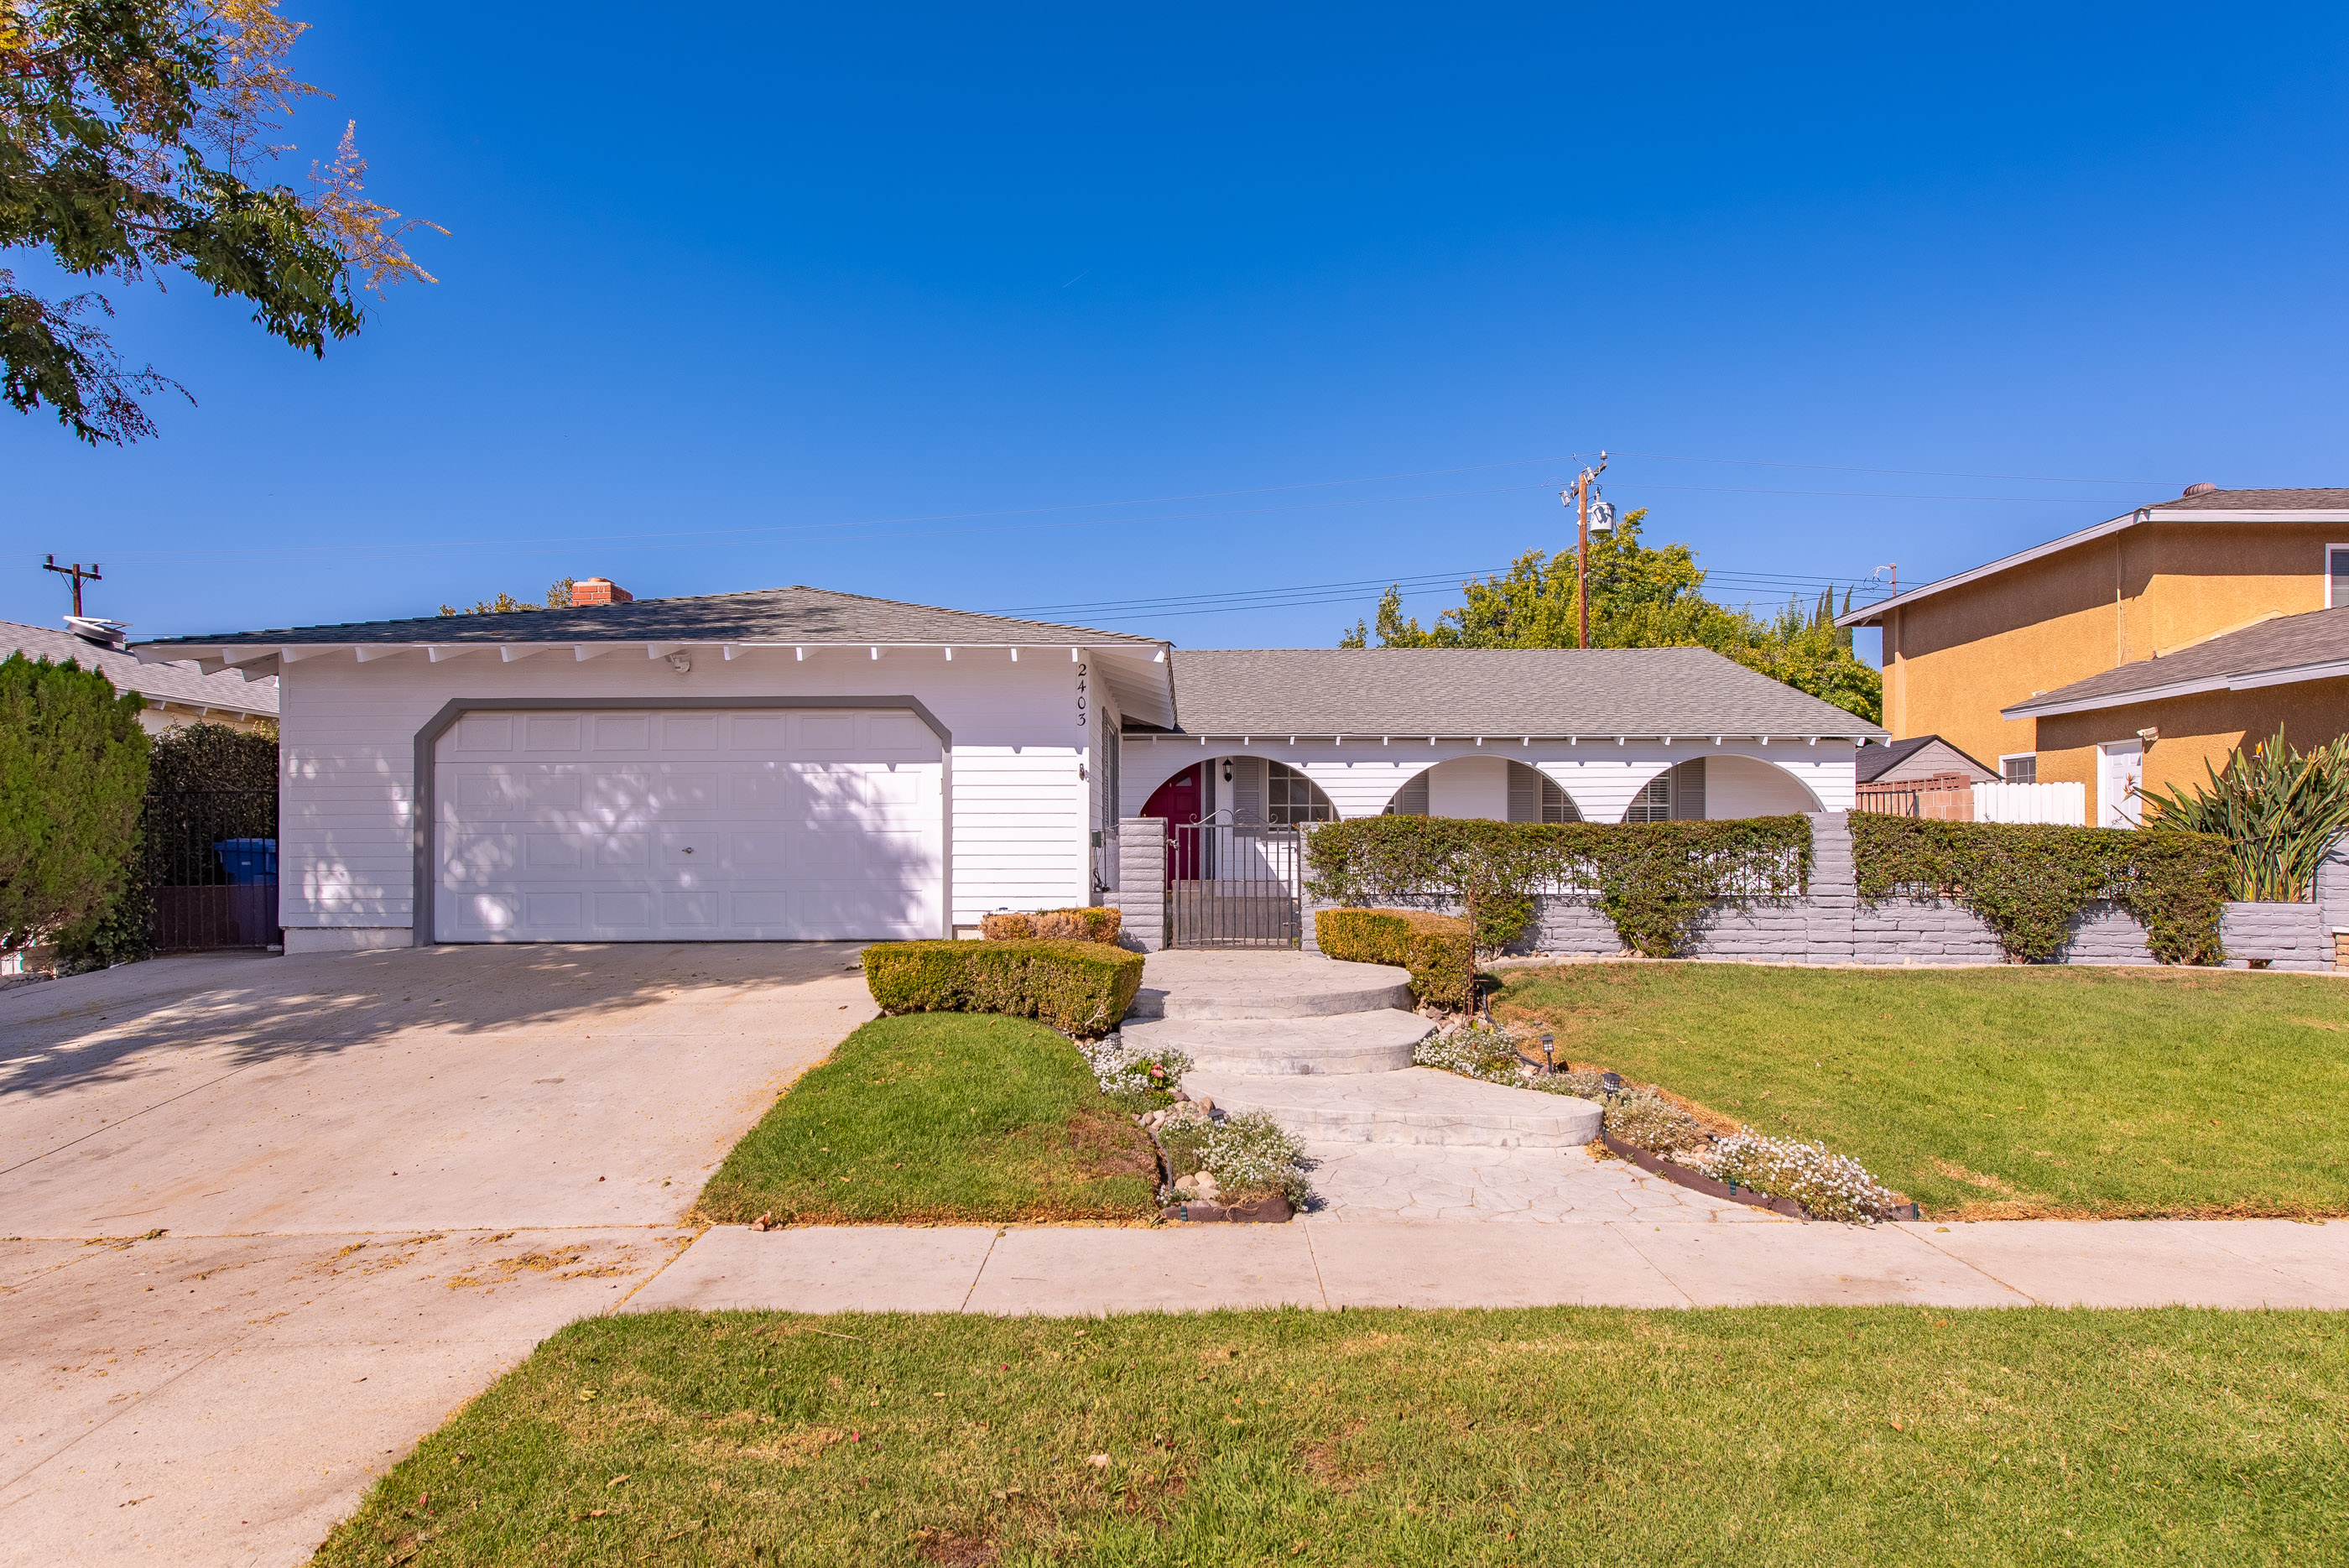 2403 Brentwood Ave Simi Valley Ca 93063